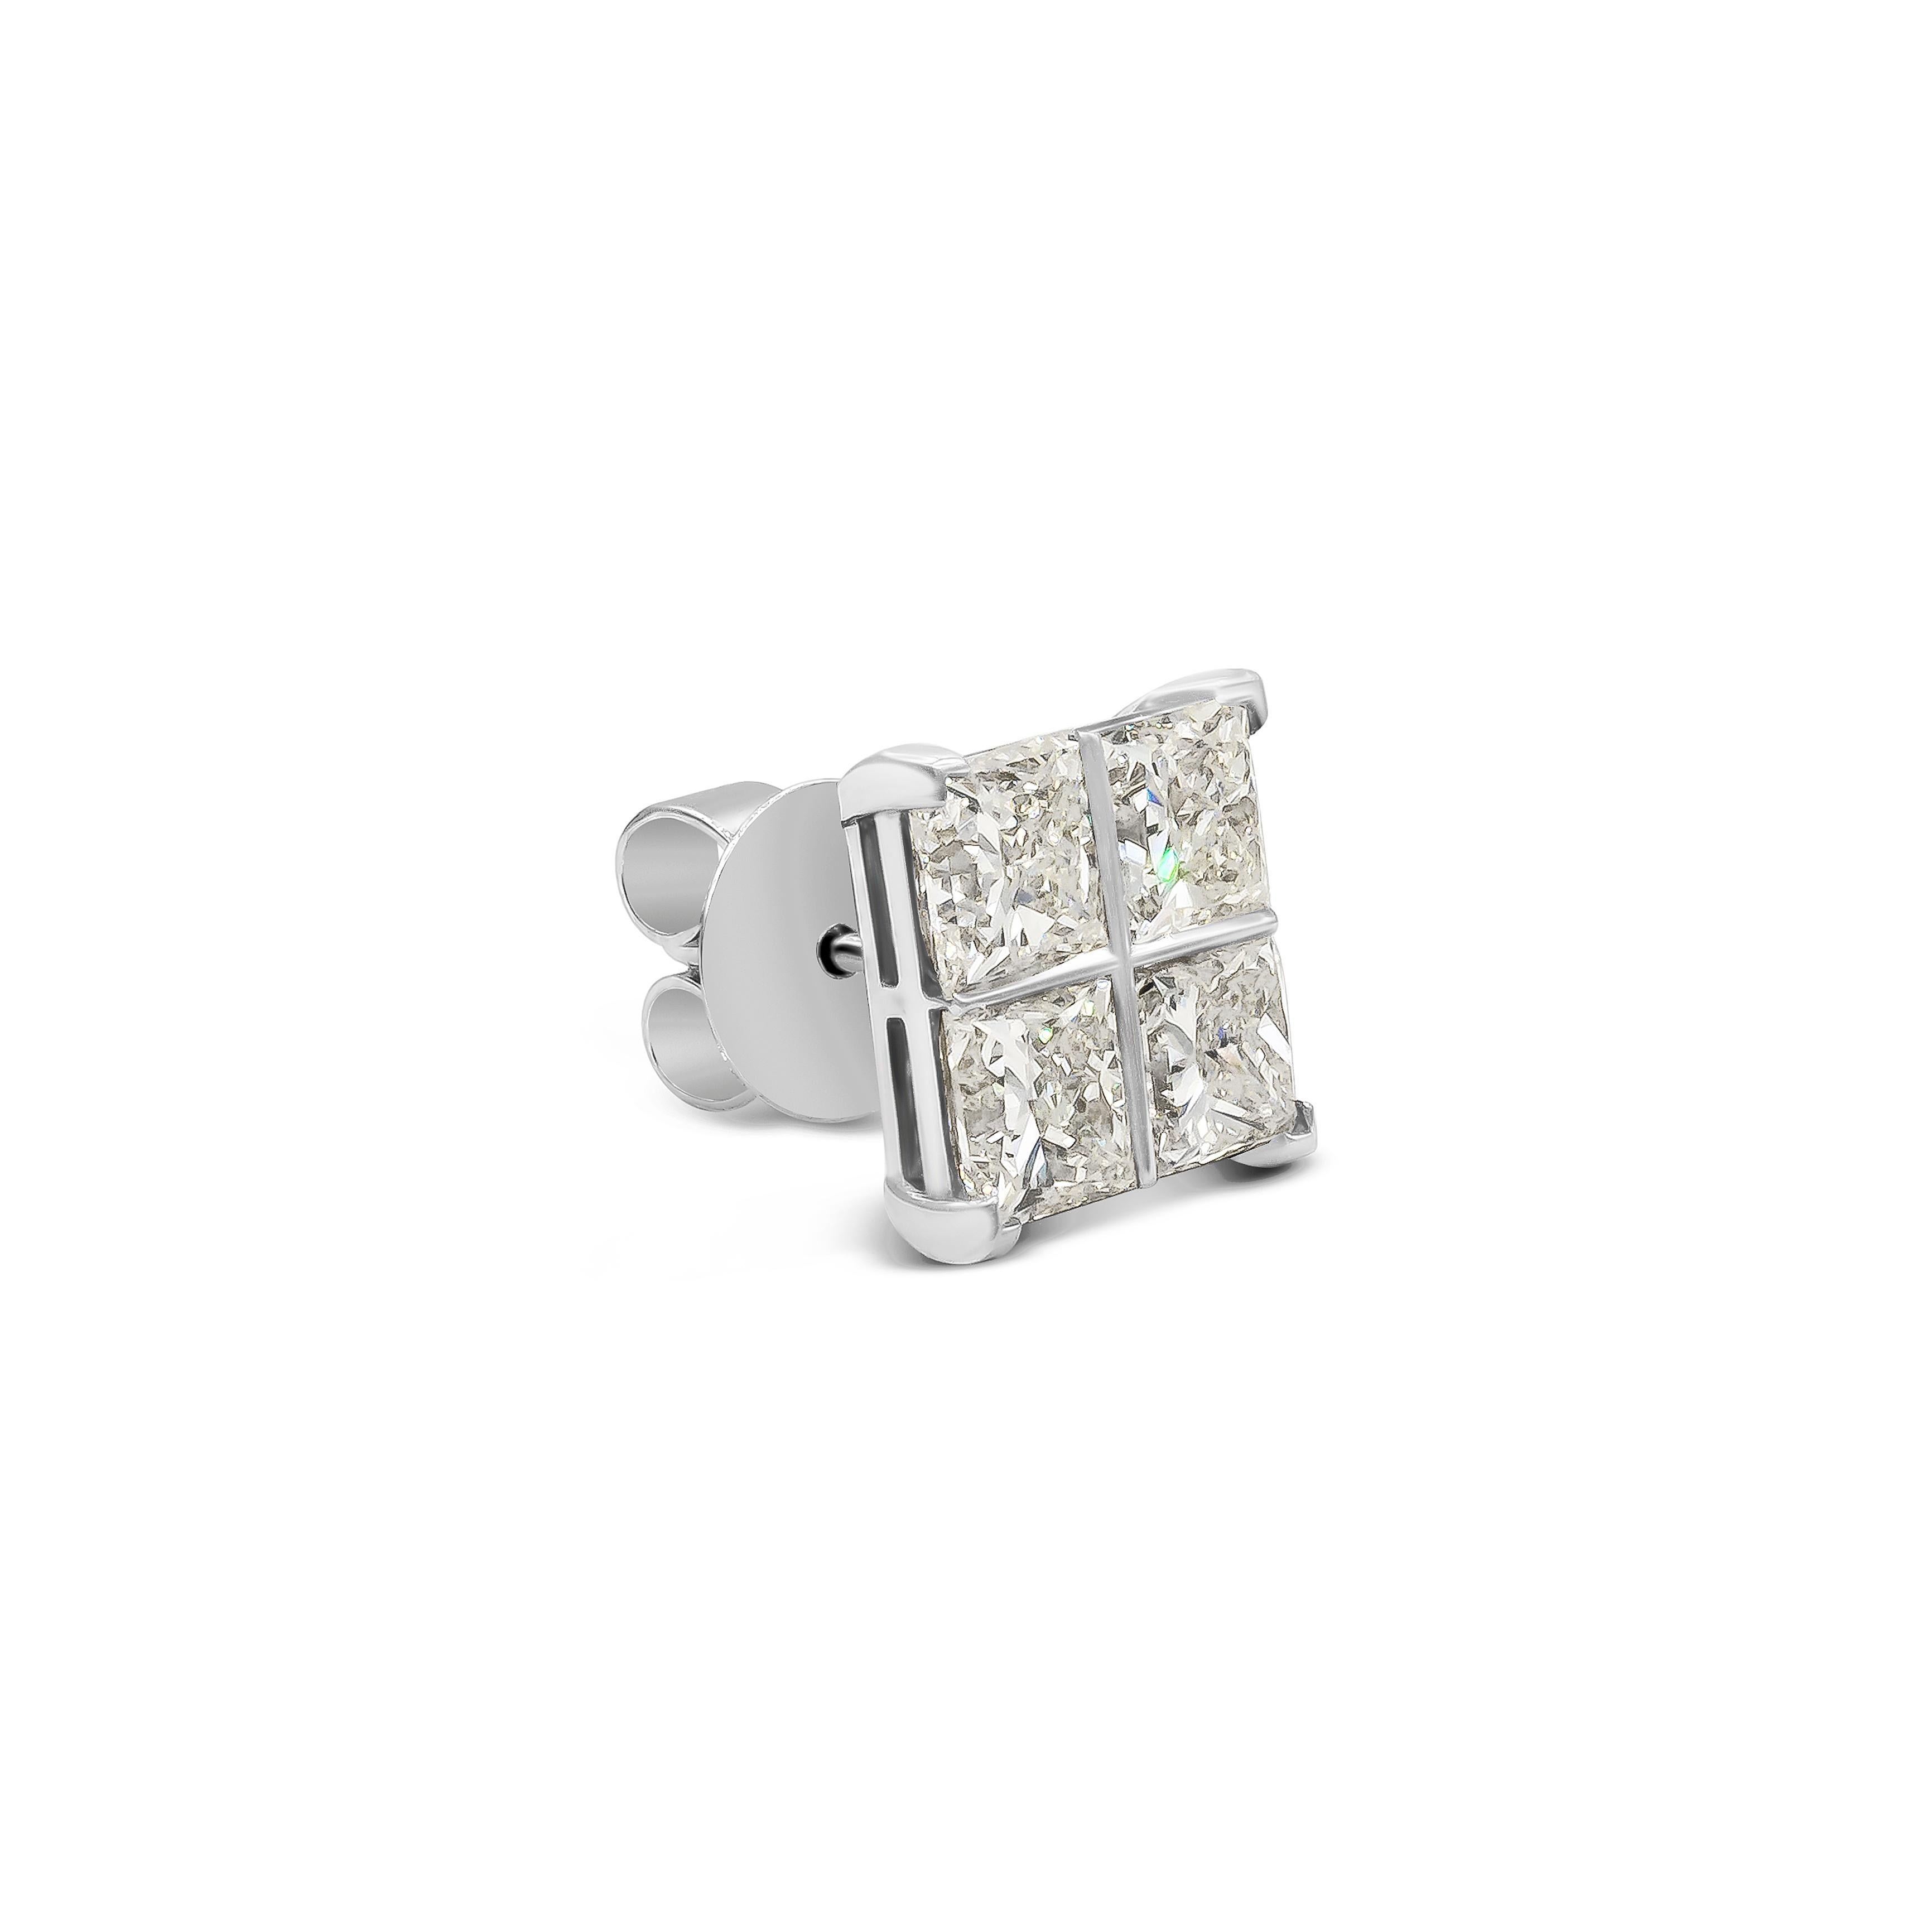 This pair of stud earrings feature 8 princess cut diamonds weighing 8.17 carats total, L-M in color and VS+ in clarity.  Each earring has 4 diamonds set in such a way that it gives the impression of one large diamond earring. Set in 18K white gold.